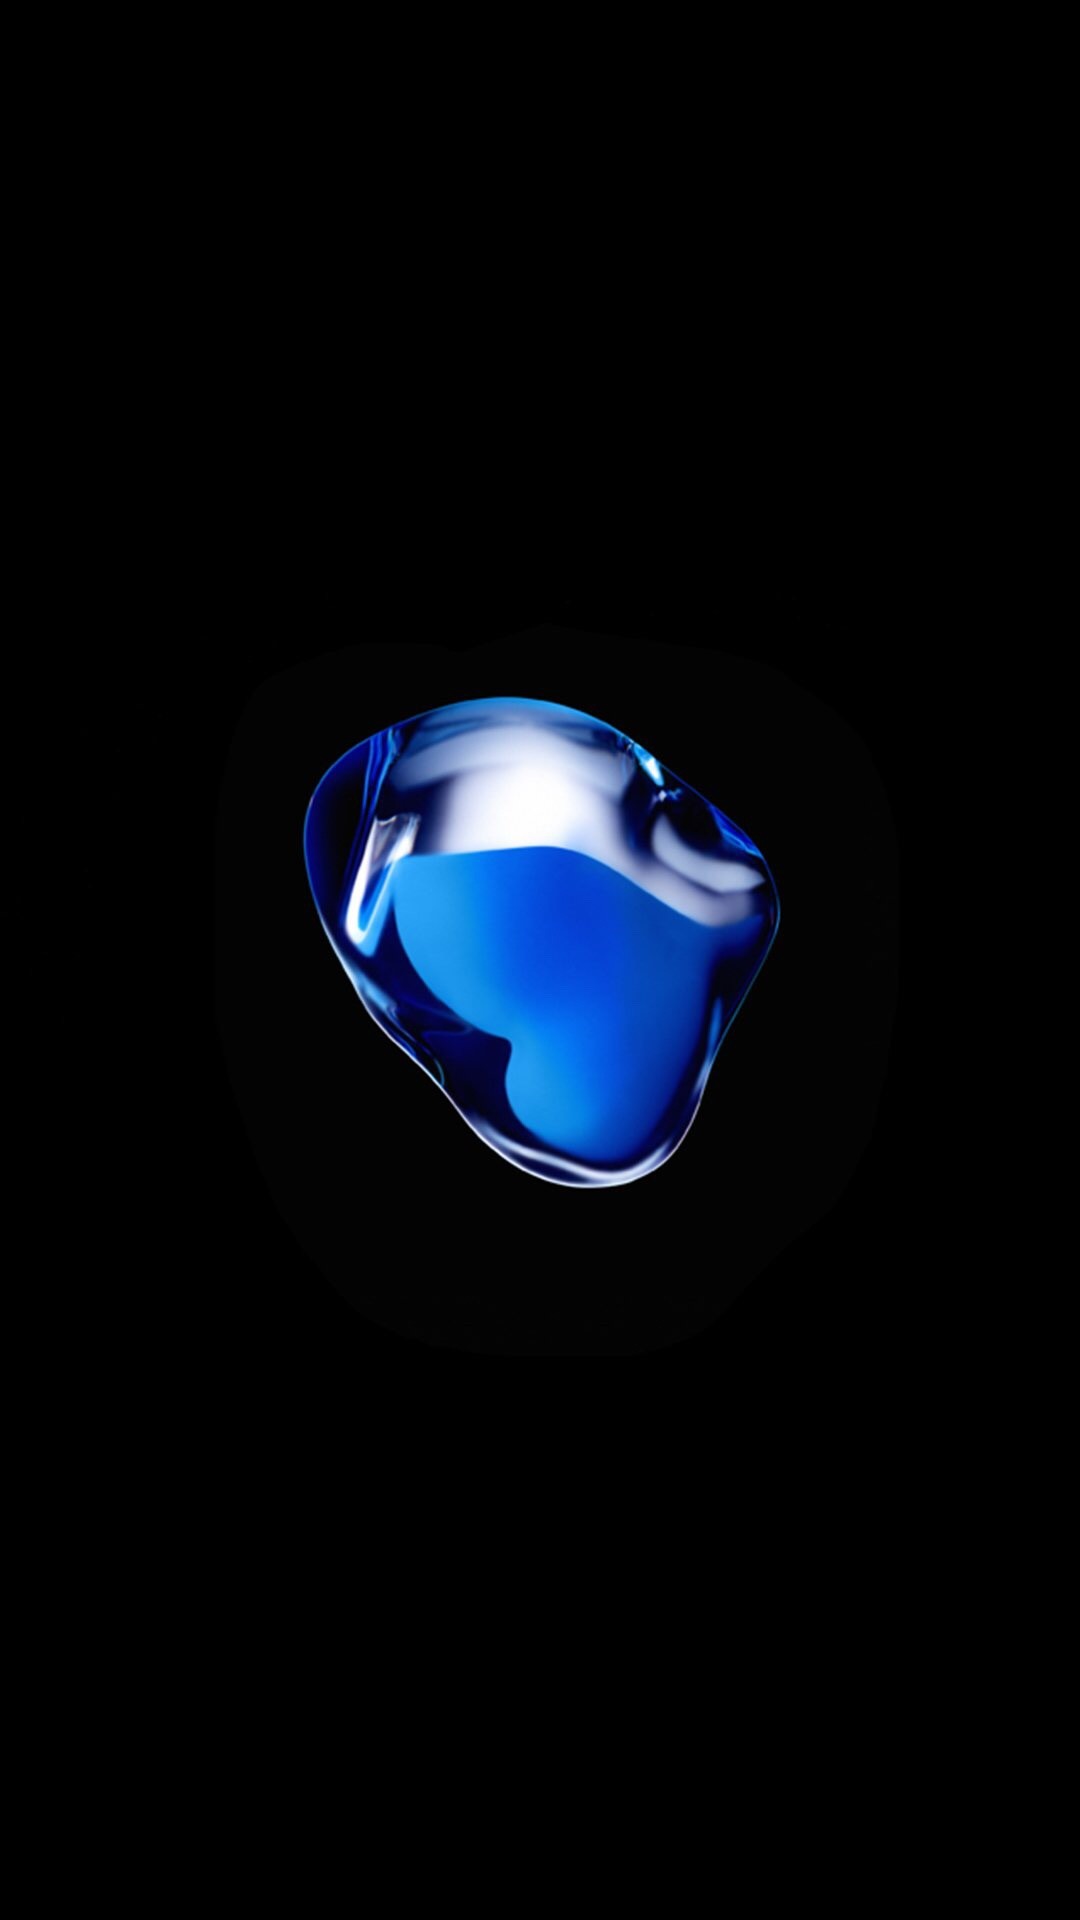 1080x1920 The Blue blob wallpaper in the iPhone 7 ads-img_0365.jpg